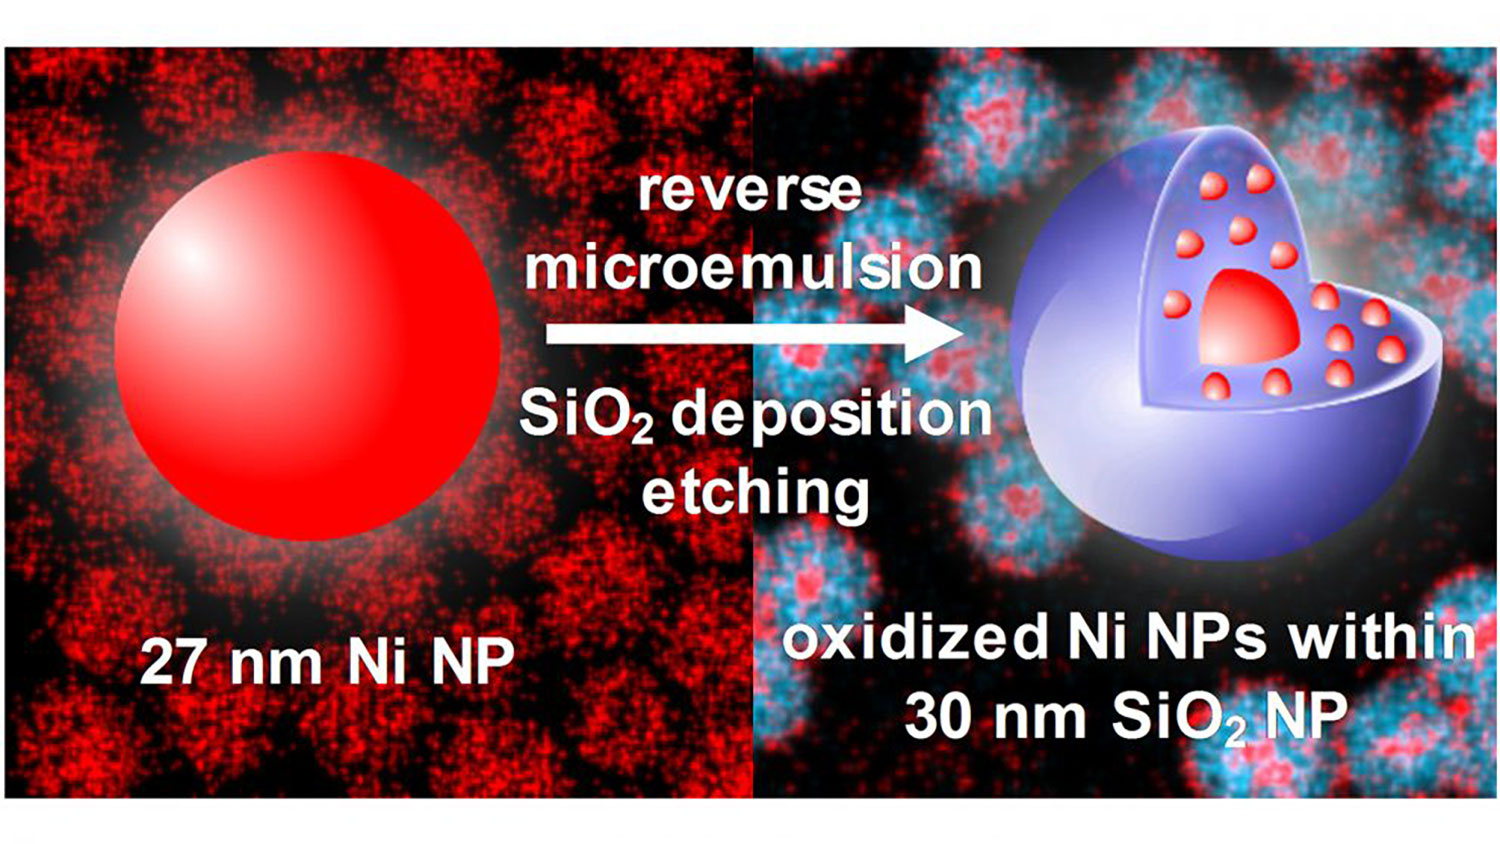 During deposition of a silica shell onto Ni nanoparticles, they are etched, oxidized, and embedded in the silica, which stabilizes the structure during oxidation and reduction. Image credit: Brian Lynch. Reproduced by permission of The Royal Society of Chemistry.